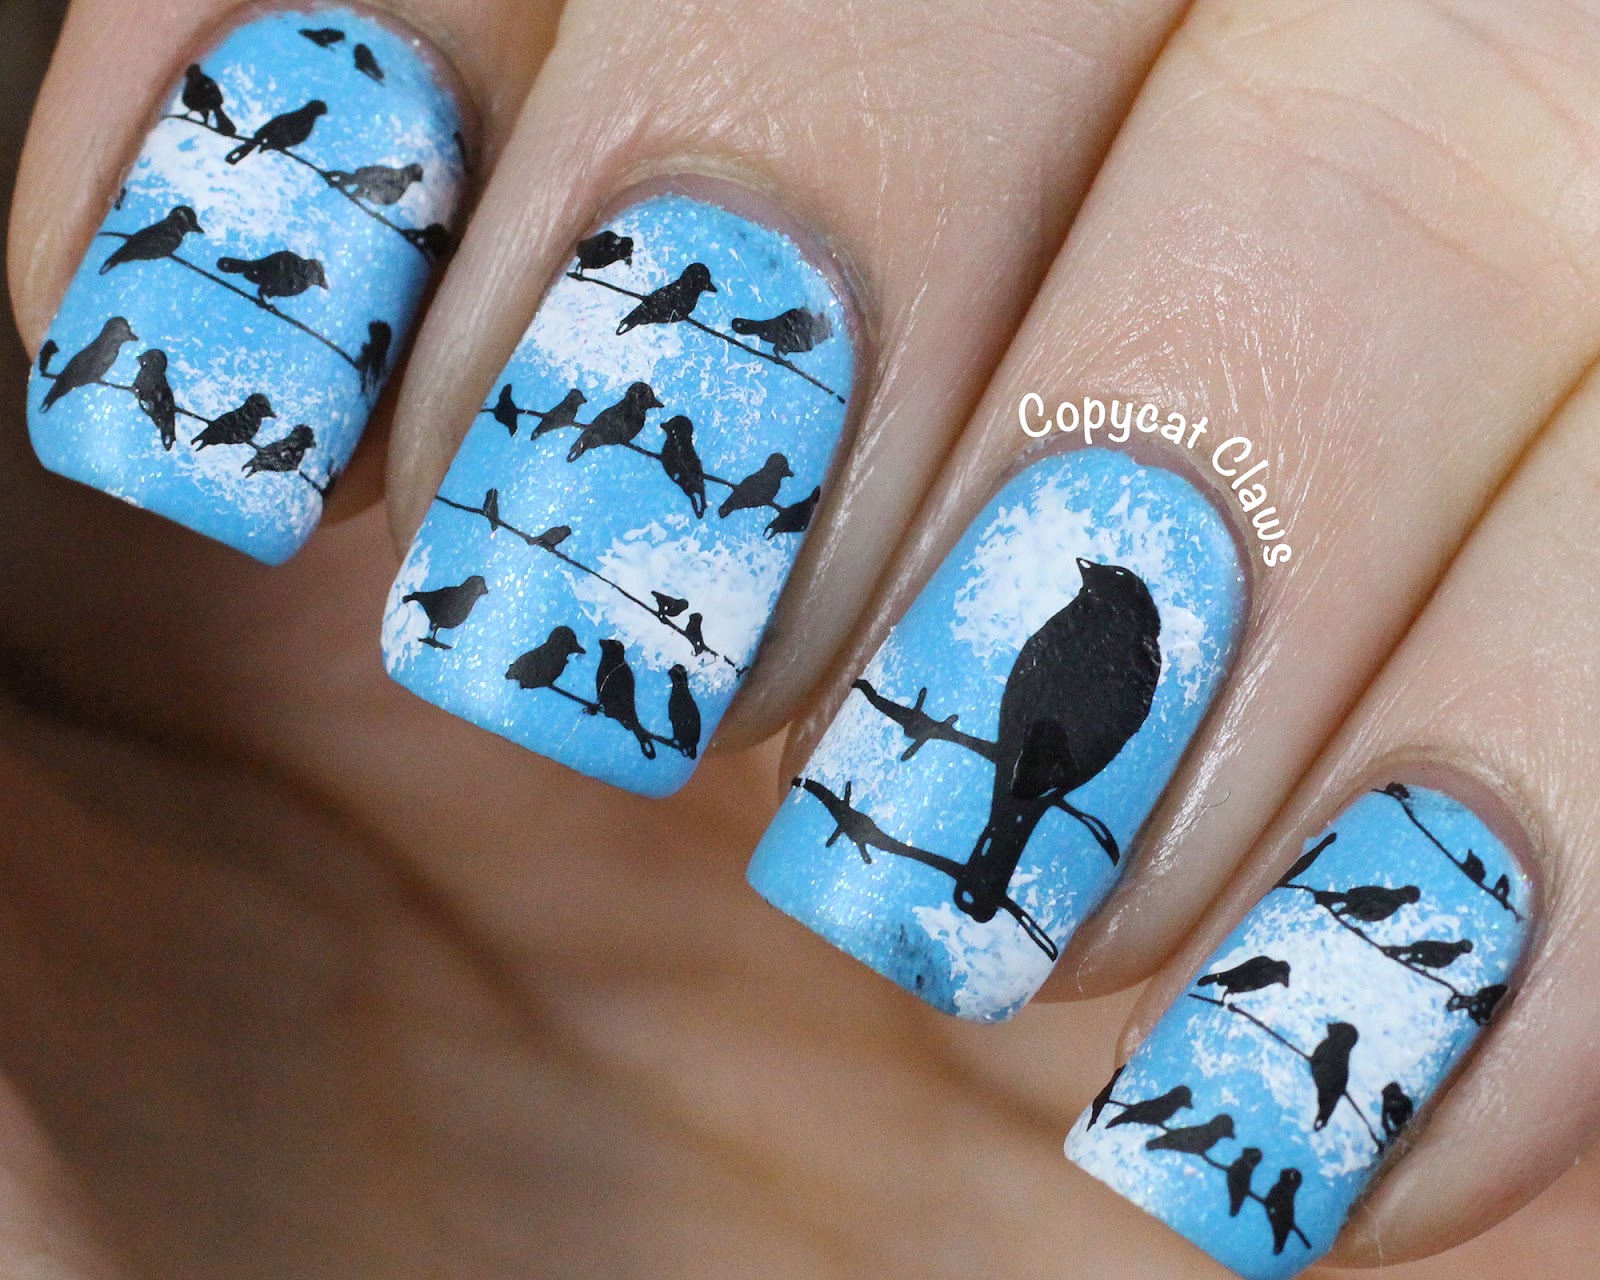 3. Colorful Bird Nail Designs - wide 6